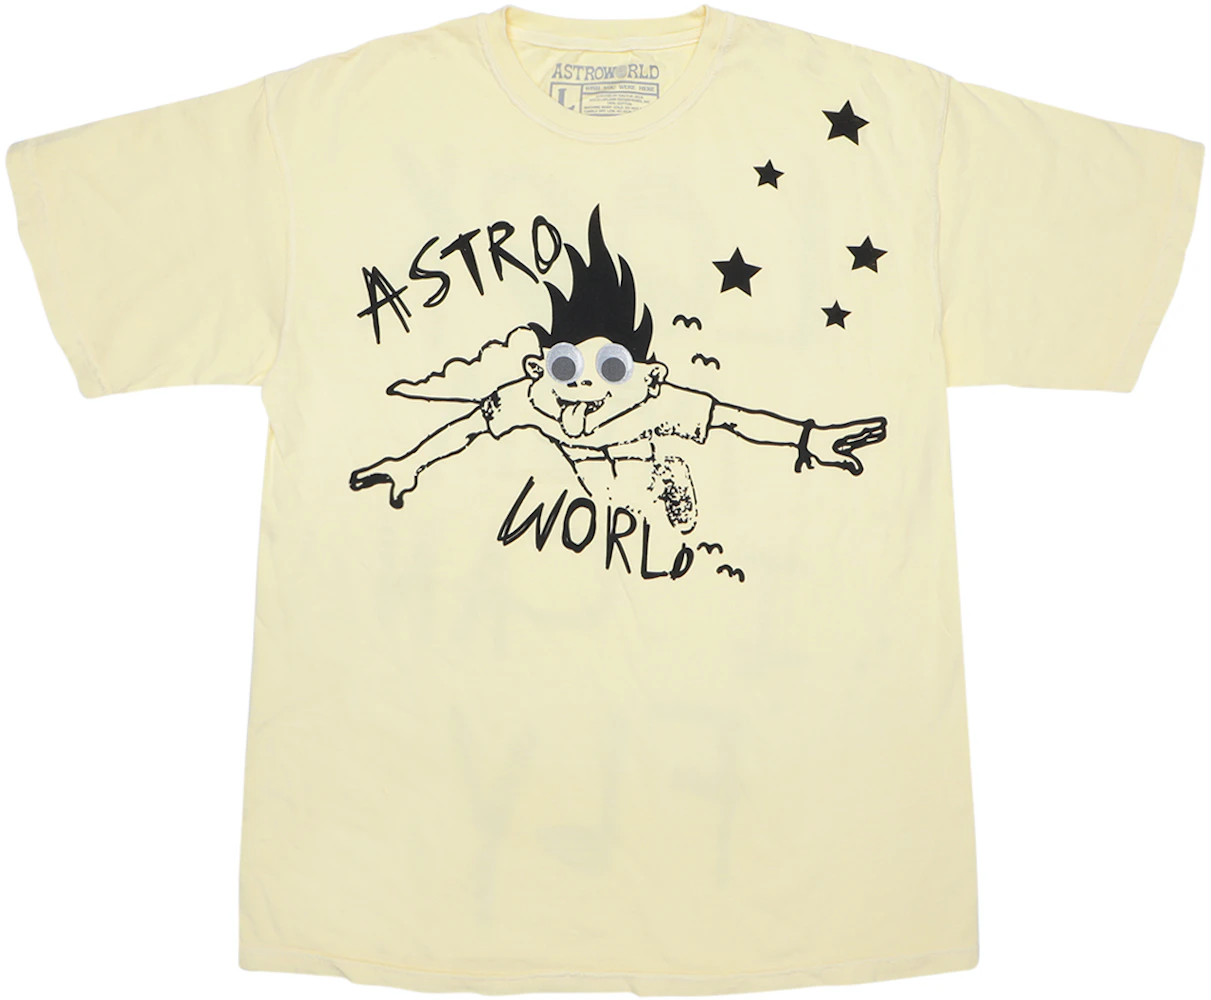 ASTROWORLD - WHITE TEE LOOK MOM I CAN FLY TRAVIS SCOTT